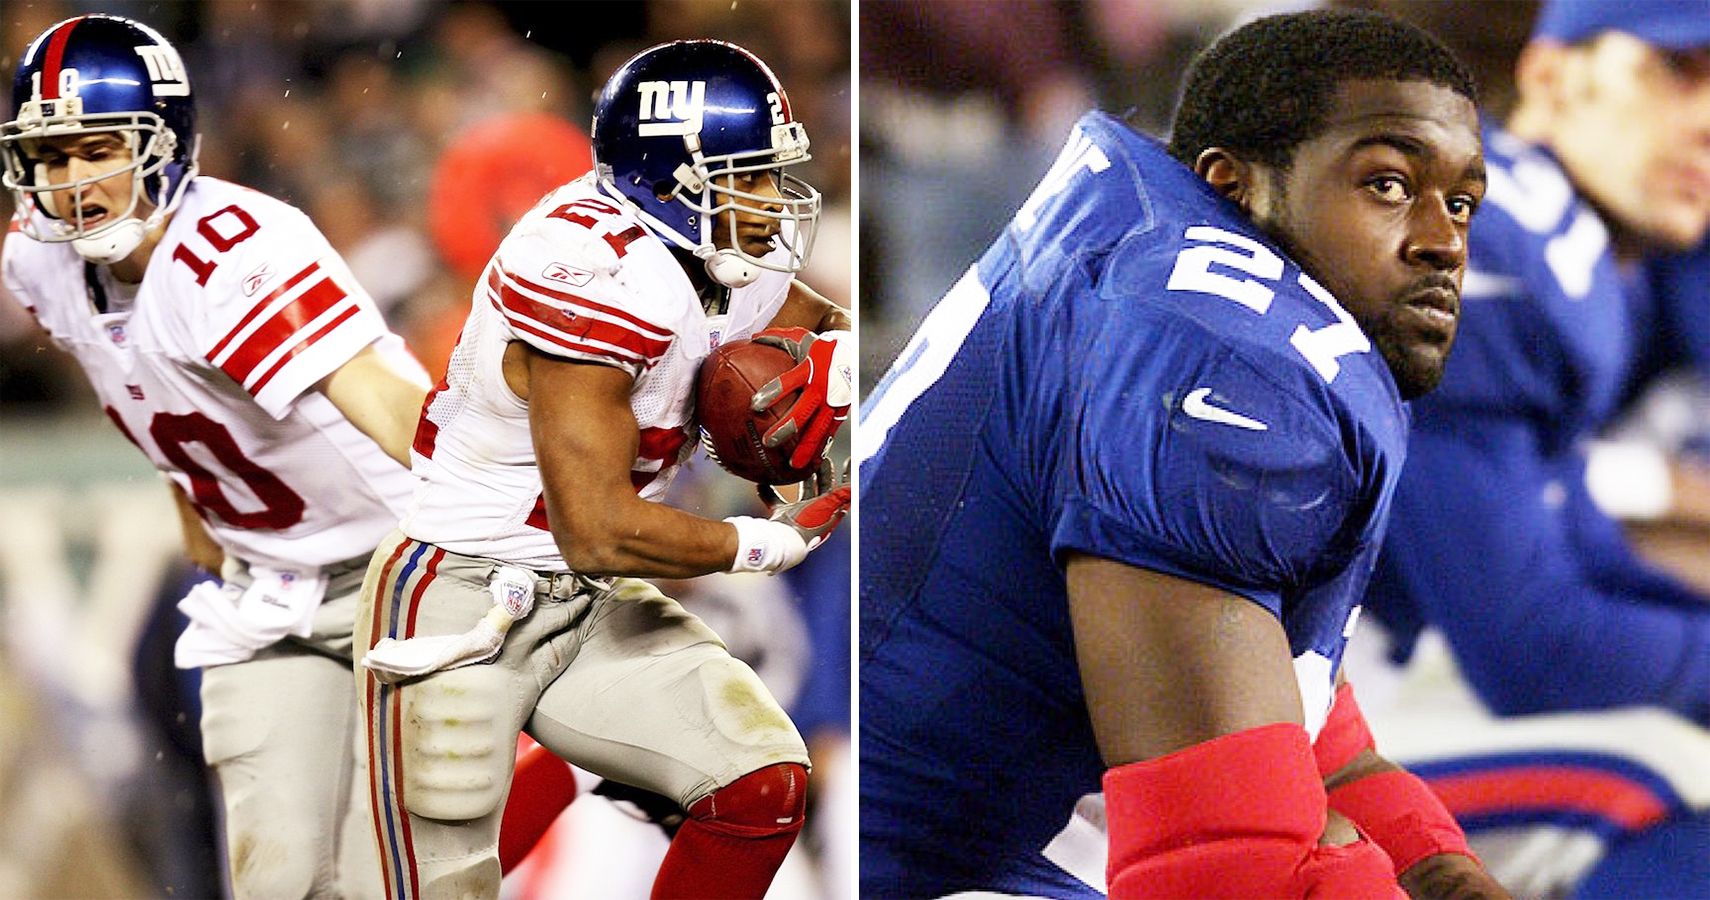 The 8 Best And 7 Worst New York Giants Players Since 20001710 x 900